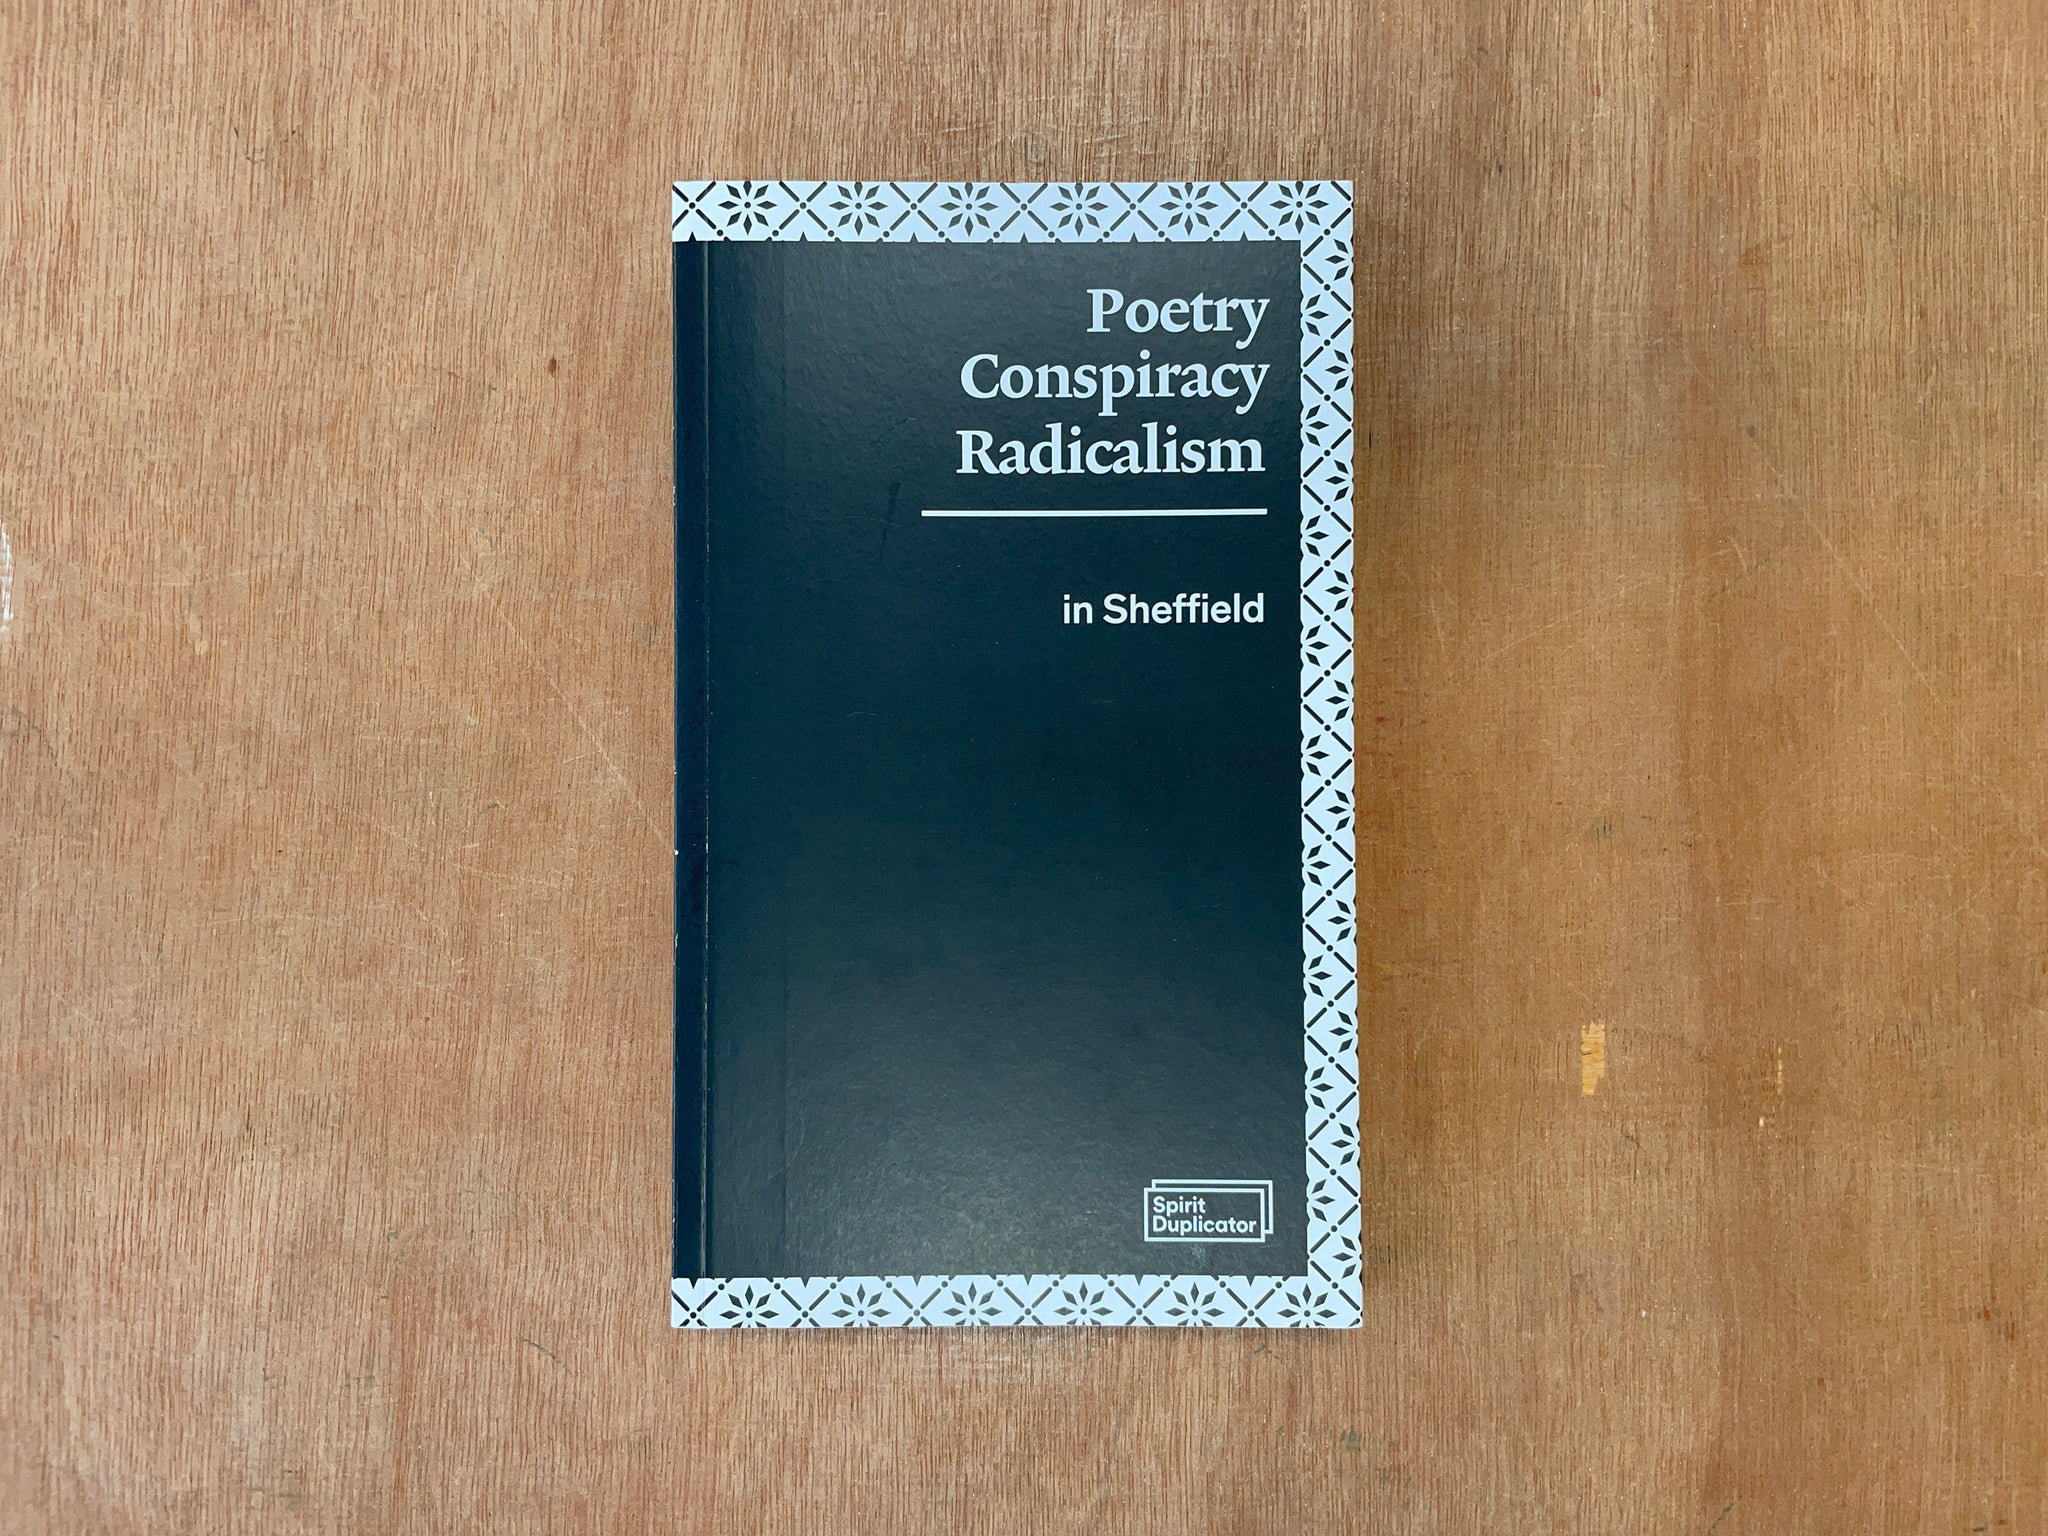 POETRY CONSPIRACY RADICALISM IN SHEFFIELD by Dr Adam James Smith and Dr Hamish Mathison